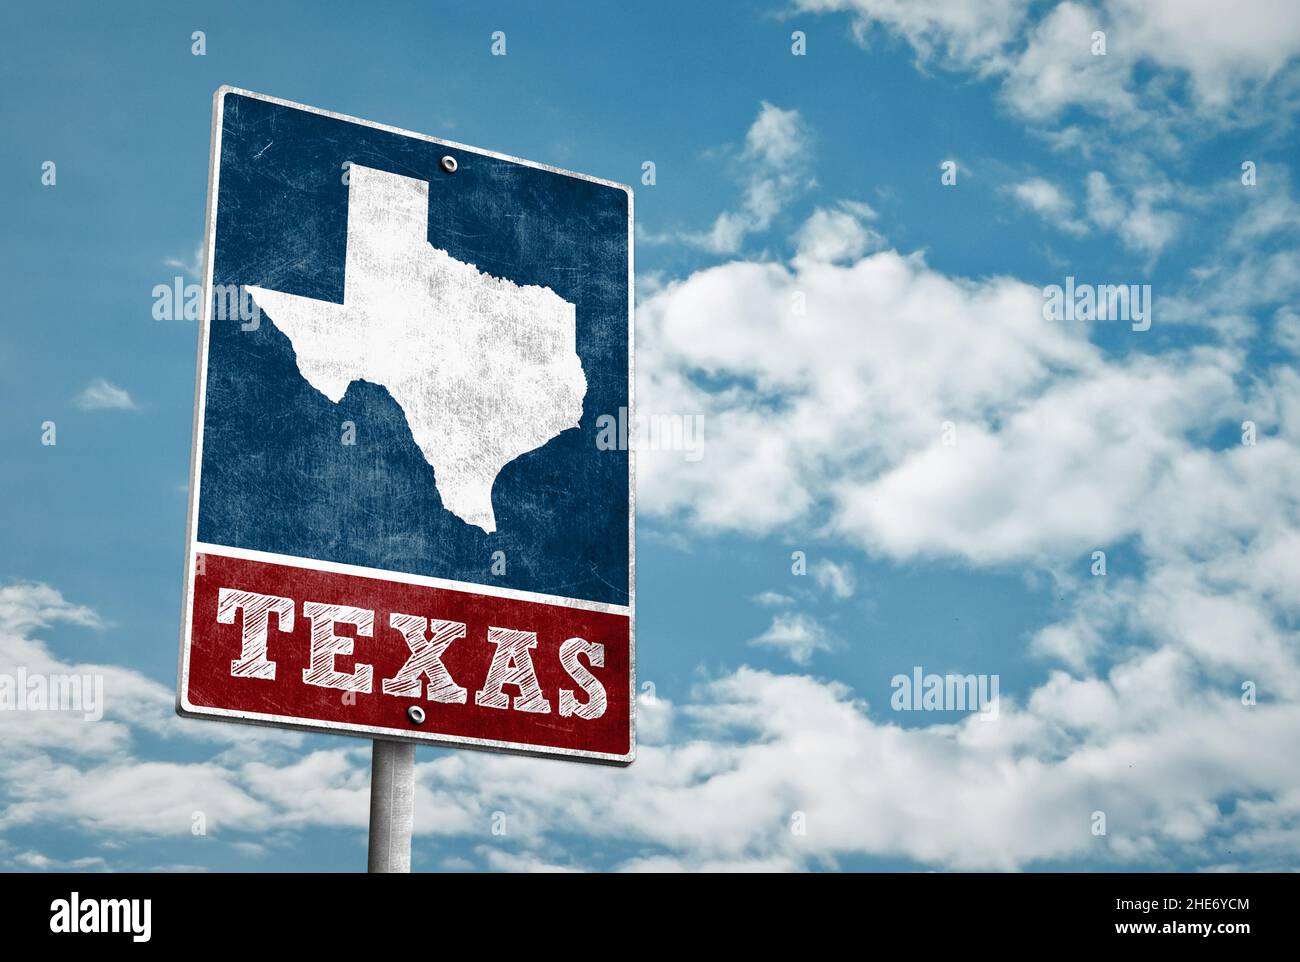 Texas Road Sign In Vintage Design Stock Photo Alamy